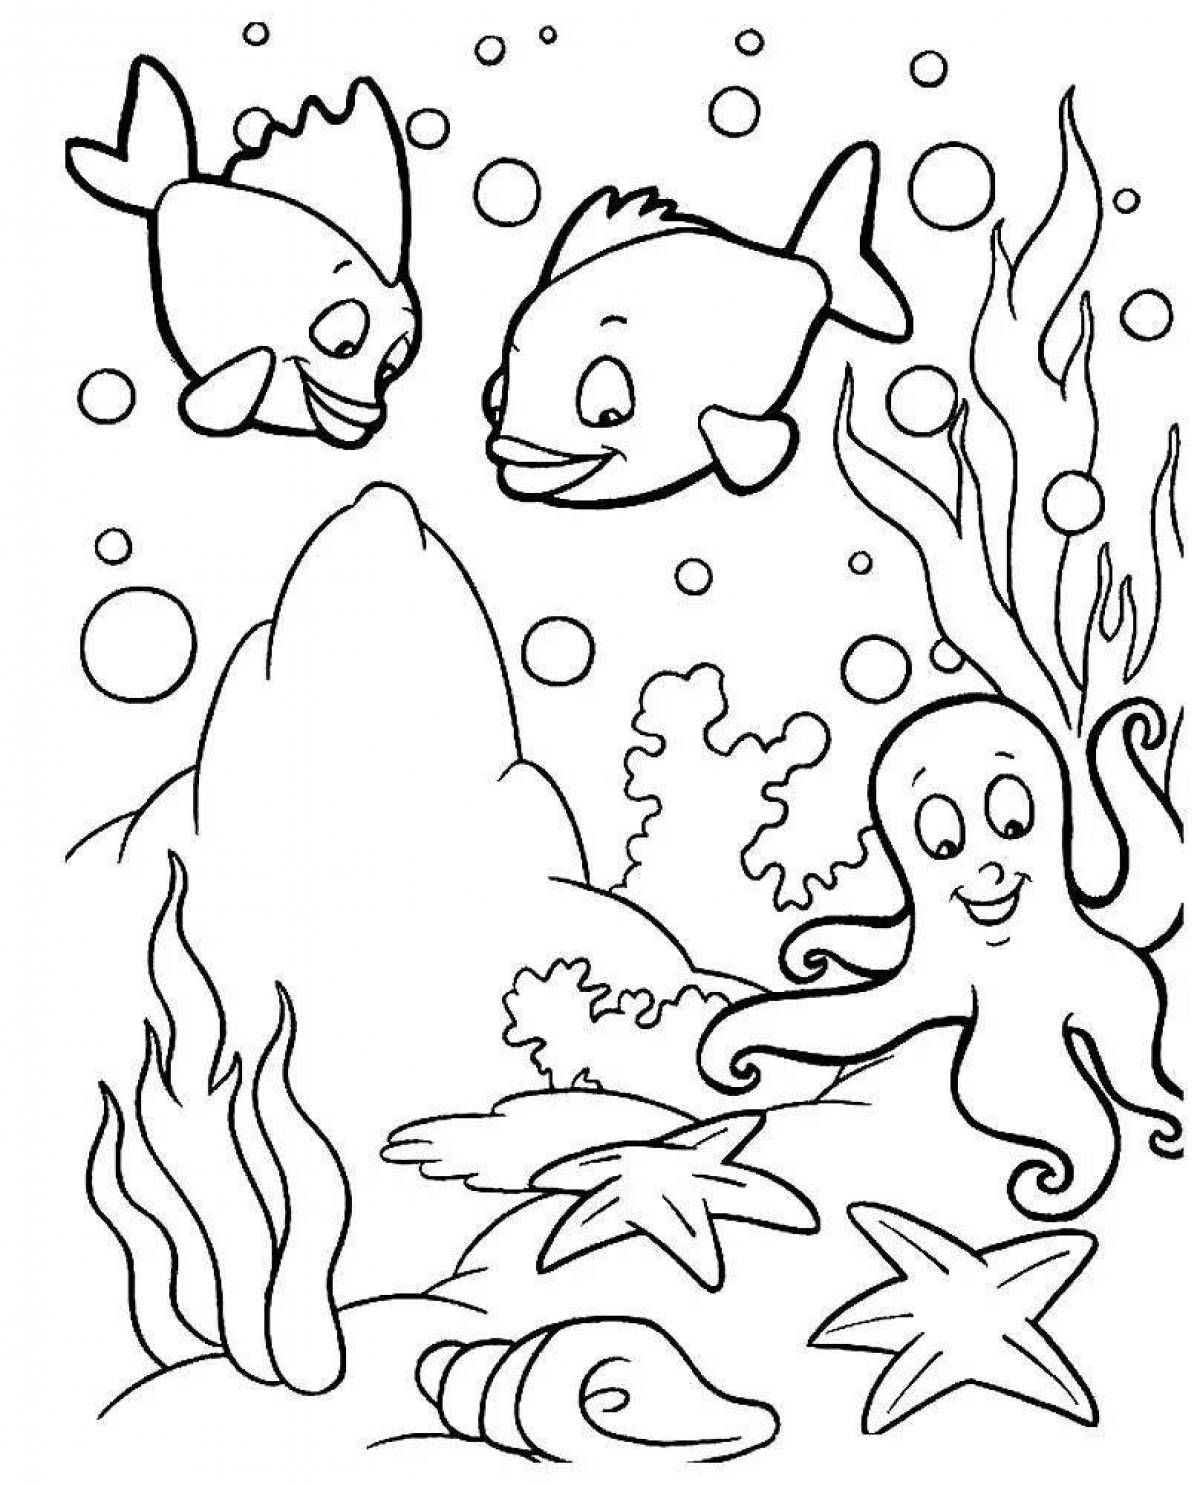 Coloring book fascinating water worlds